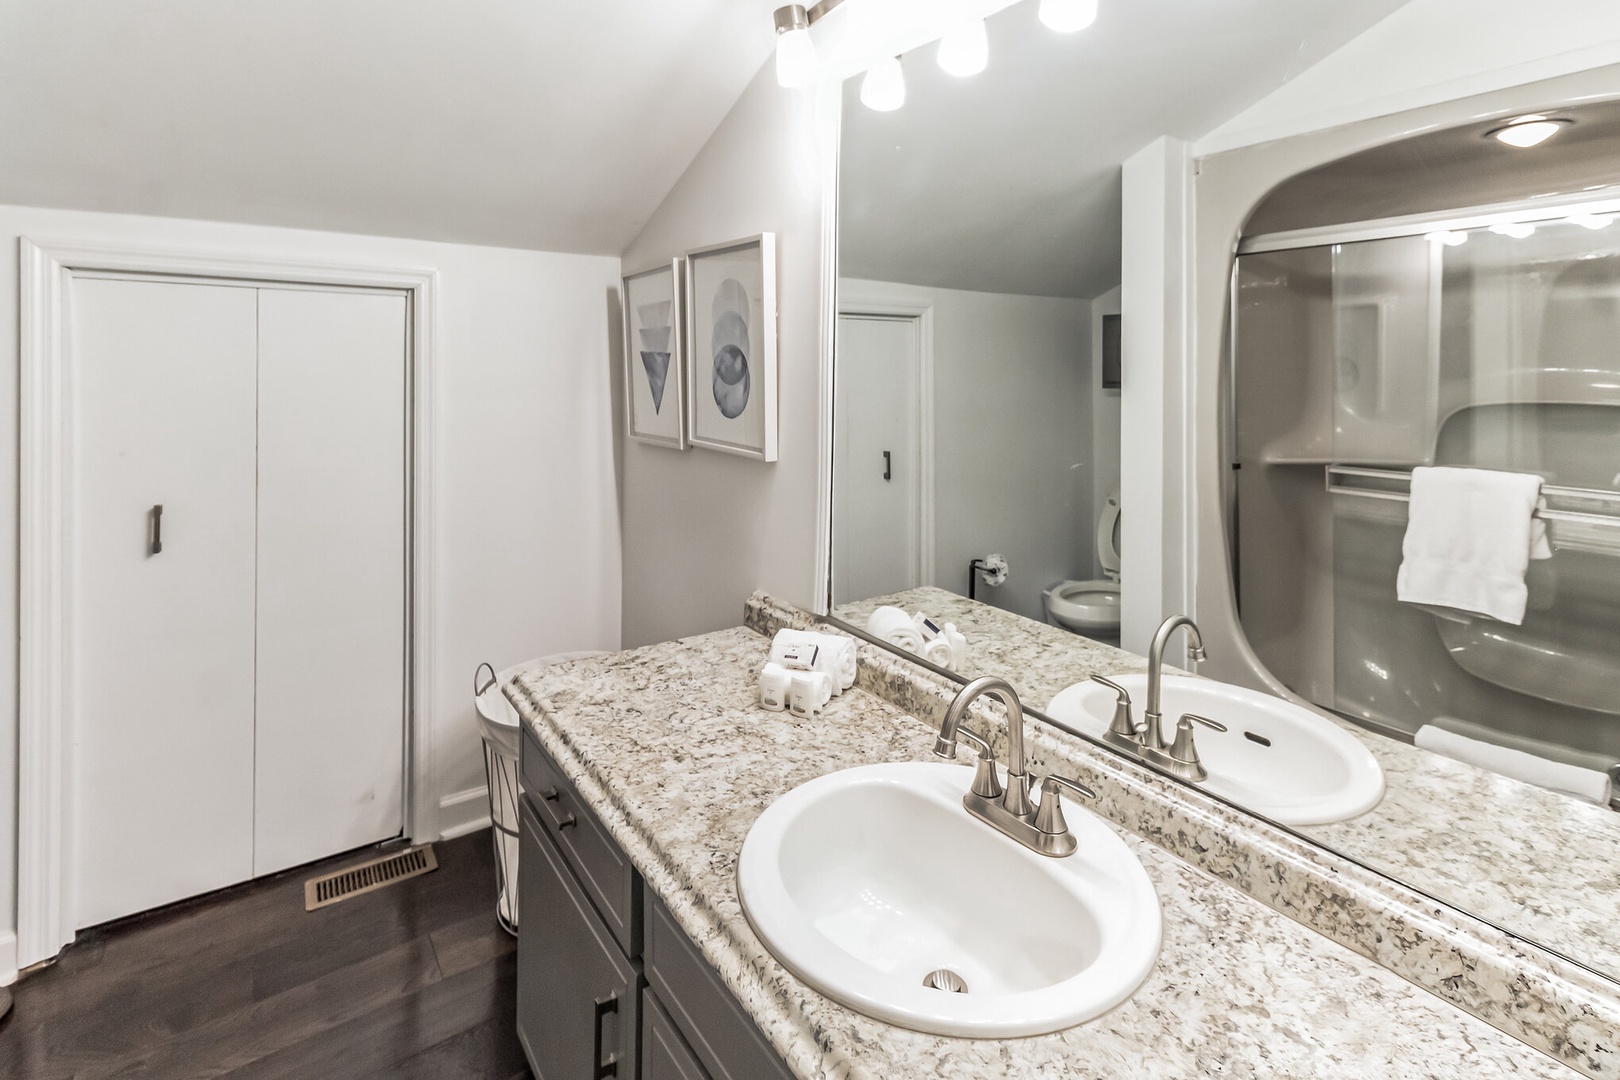 The 2nd floor full bathroom includes a large vanity & shower/tub combo